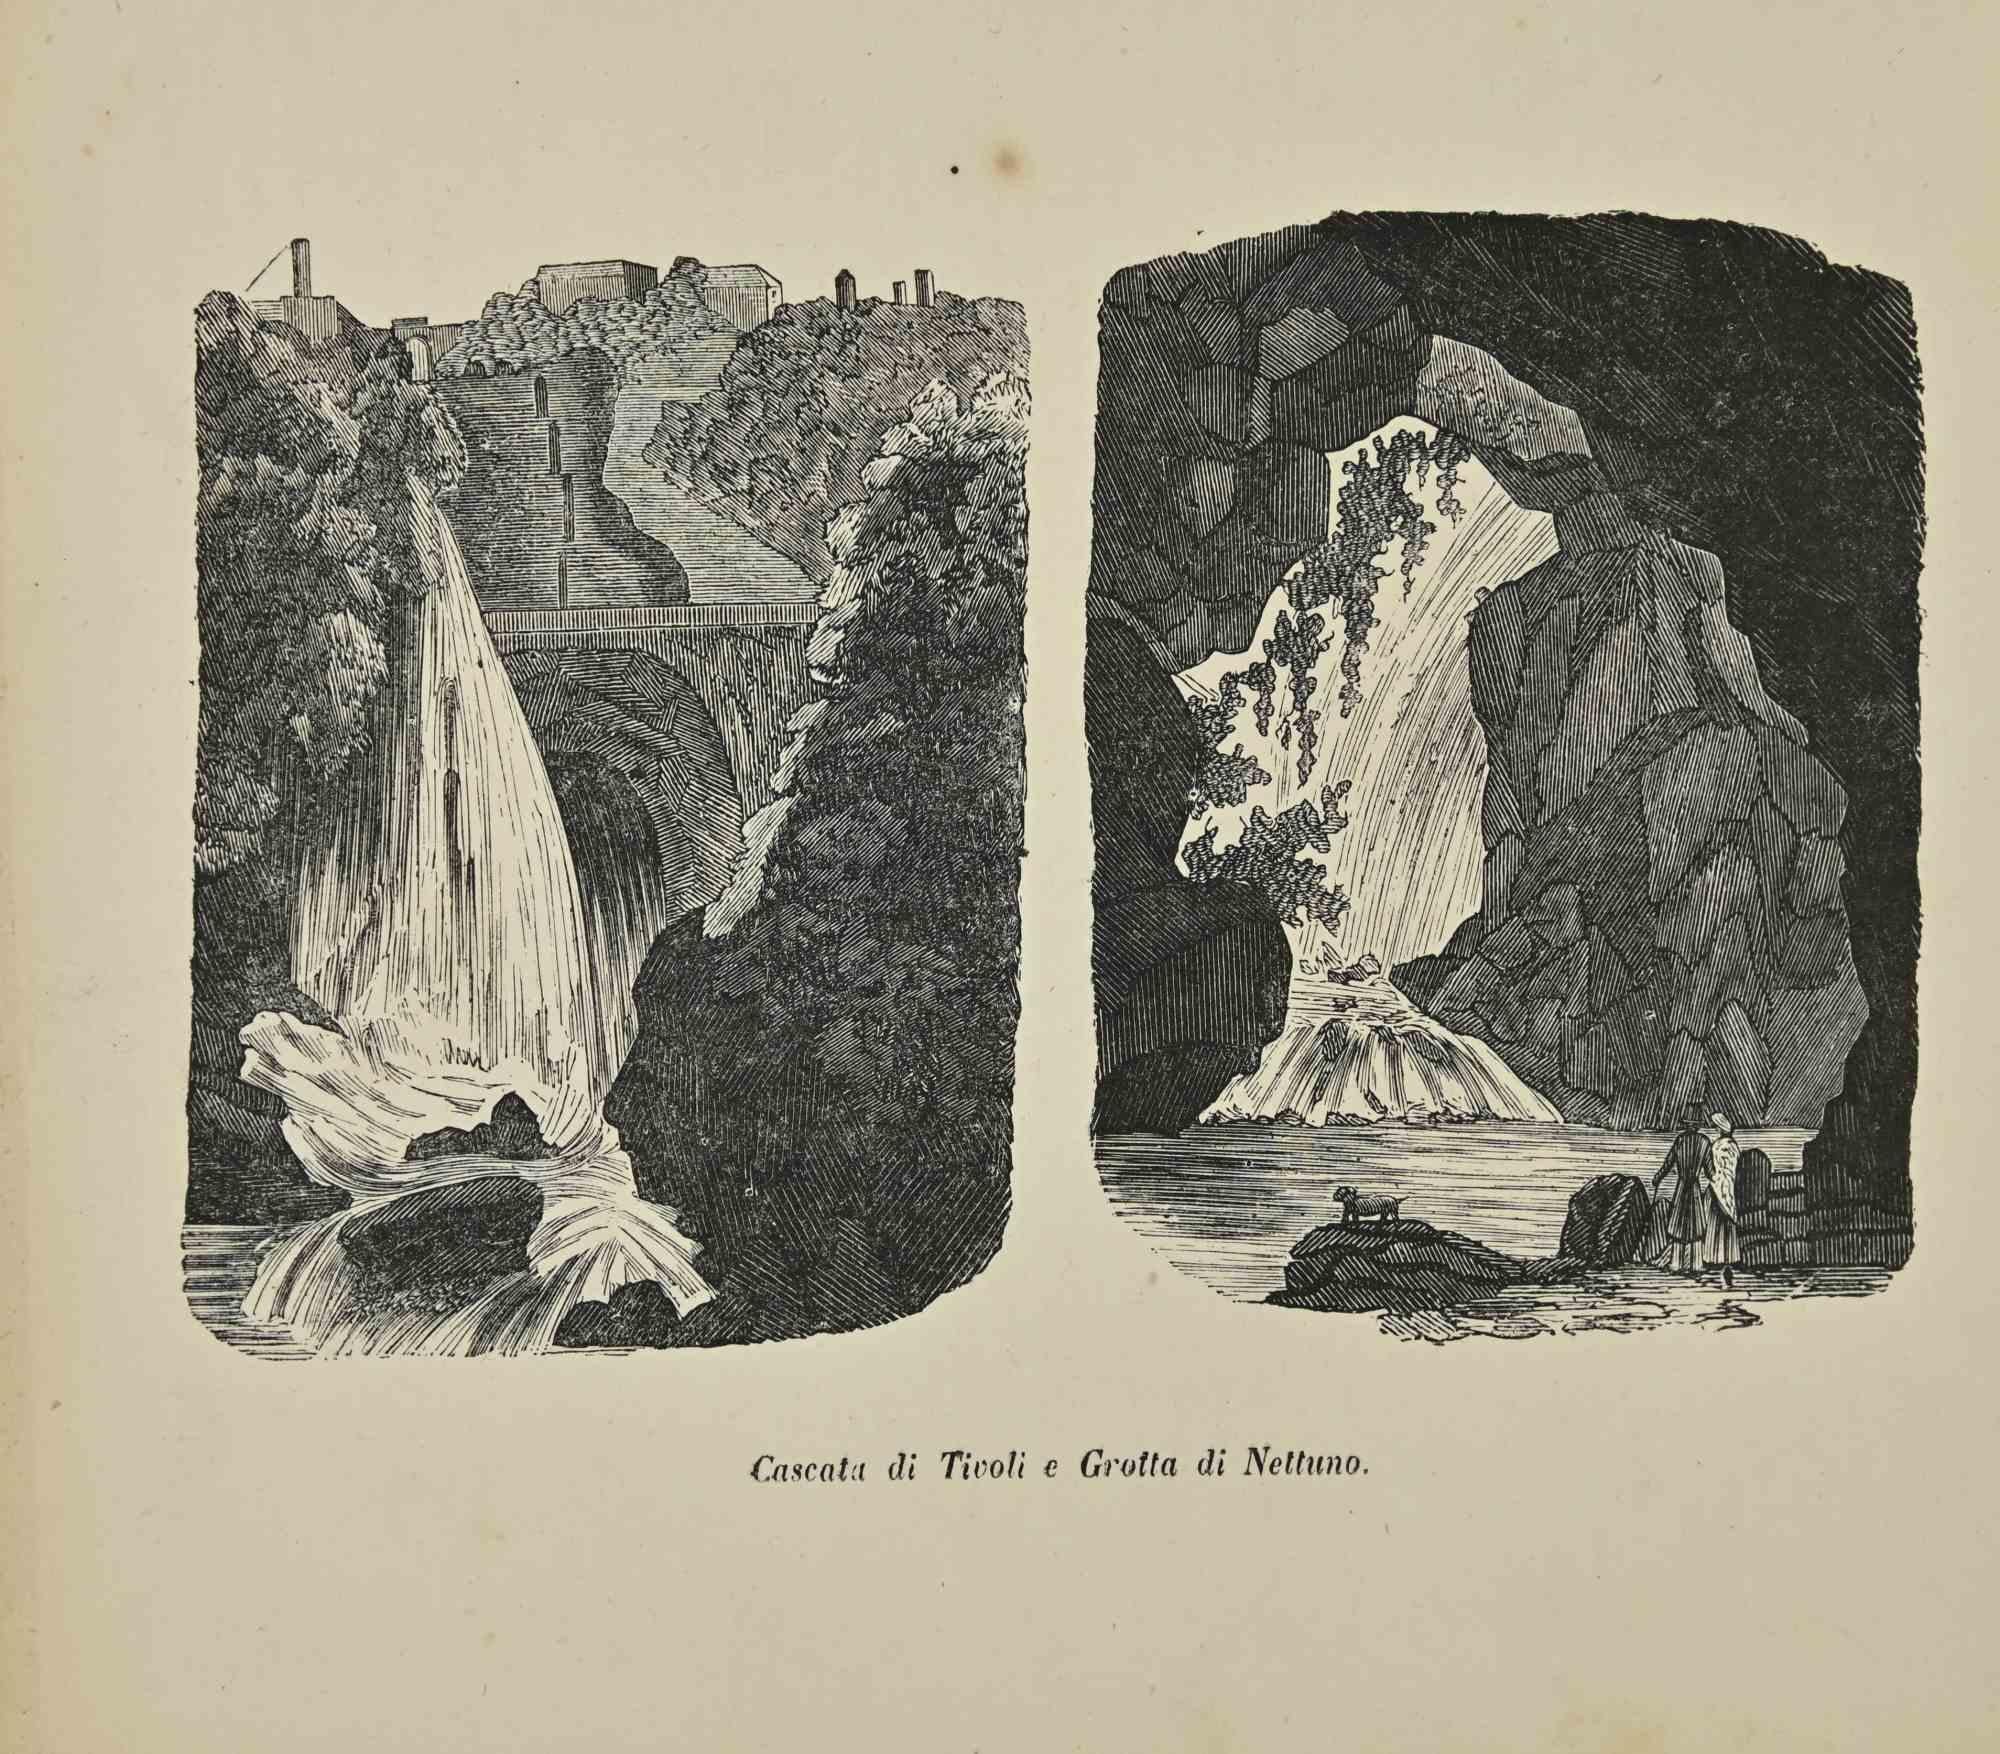 Various Artists Figurative Print - Uses and Customs - Tivoli Waterfall and Nettuno Cave - Lithograph - 1862